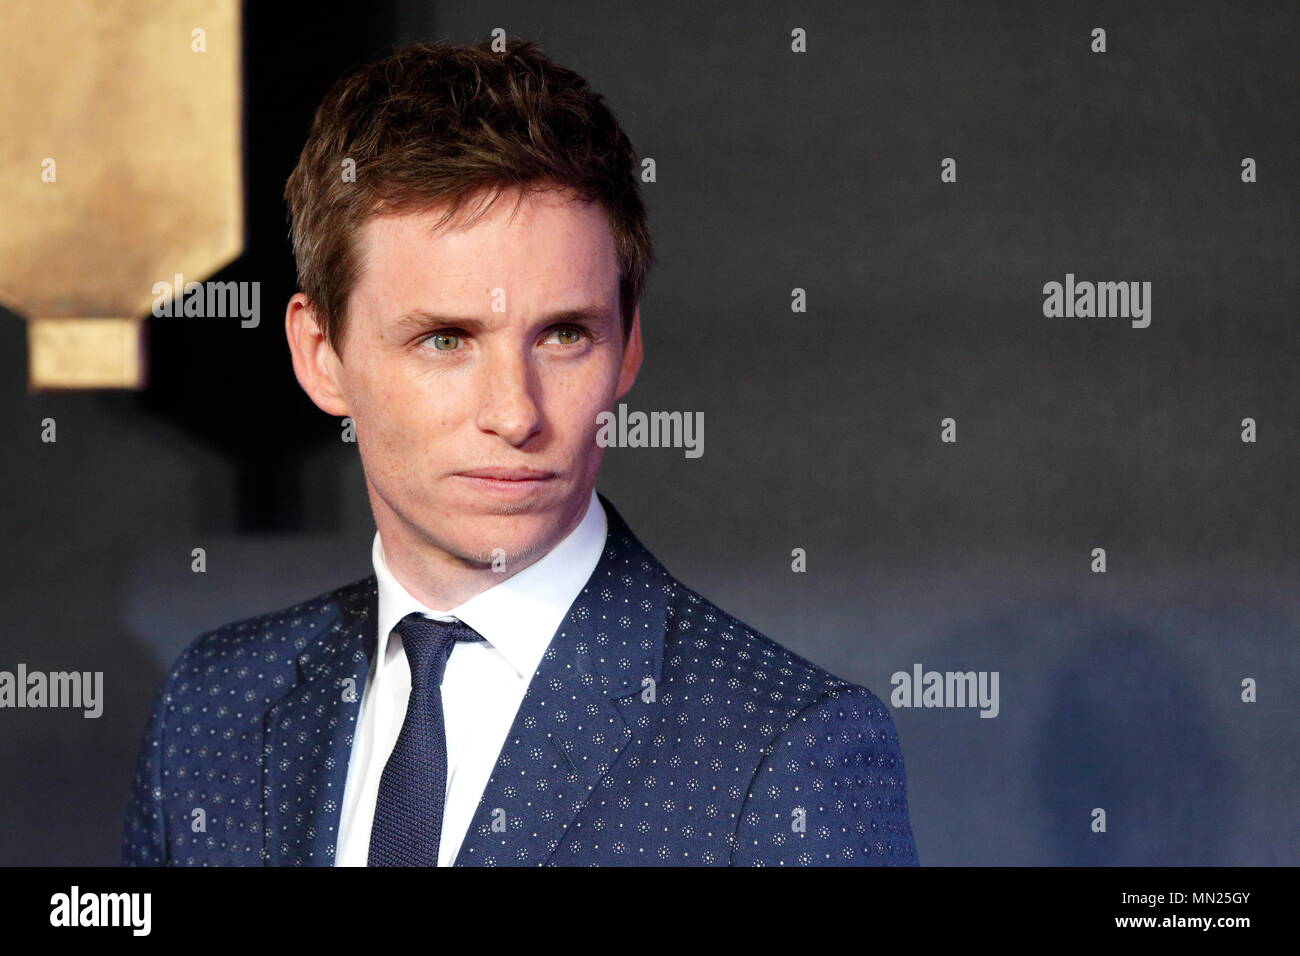 LONDON, ENGLAND - NOVEMBER 15:  Eddie Redmayne attends the European premiere of 'Fantastic Beasts And Where To Find Them' at Odeon Leicester Square on November 15, 2016 in London, England. Stock Photo